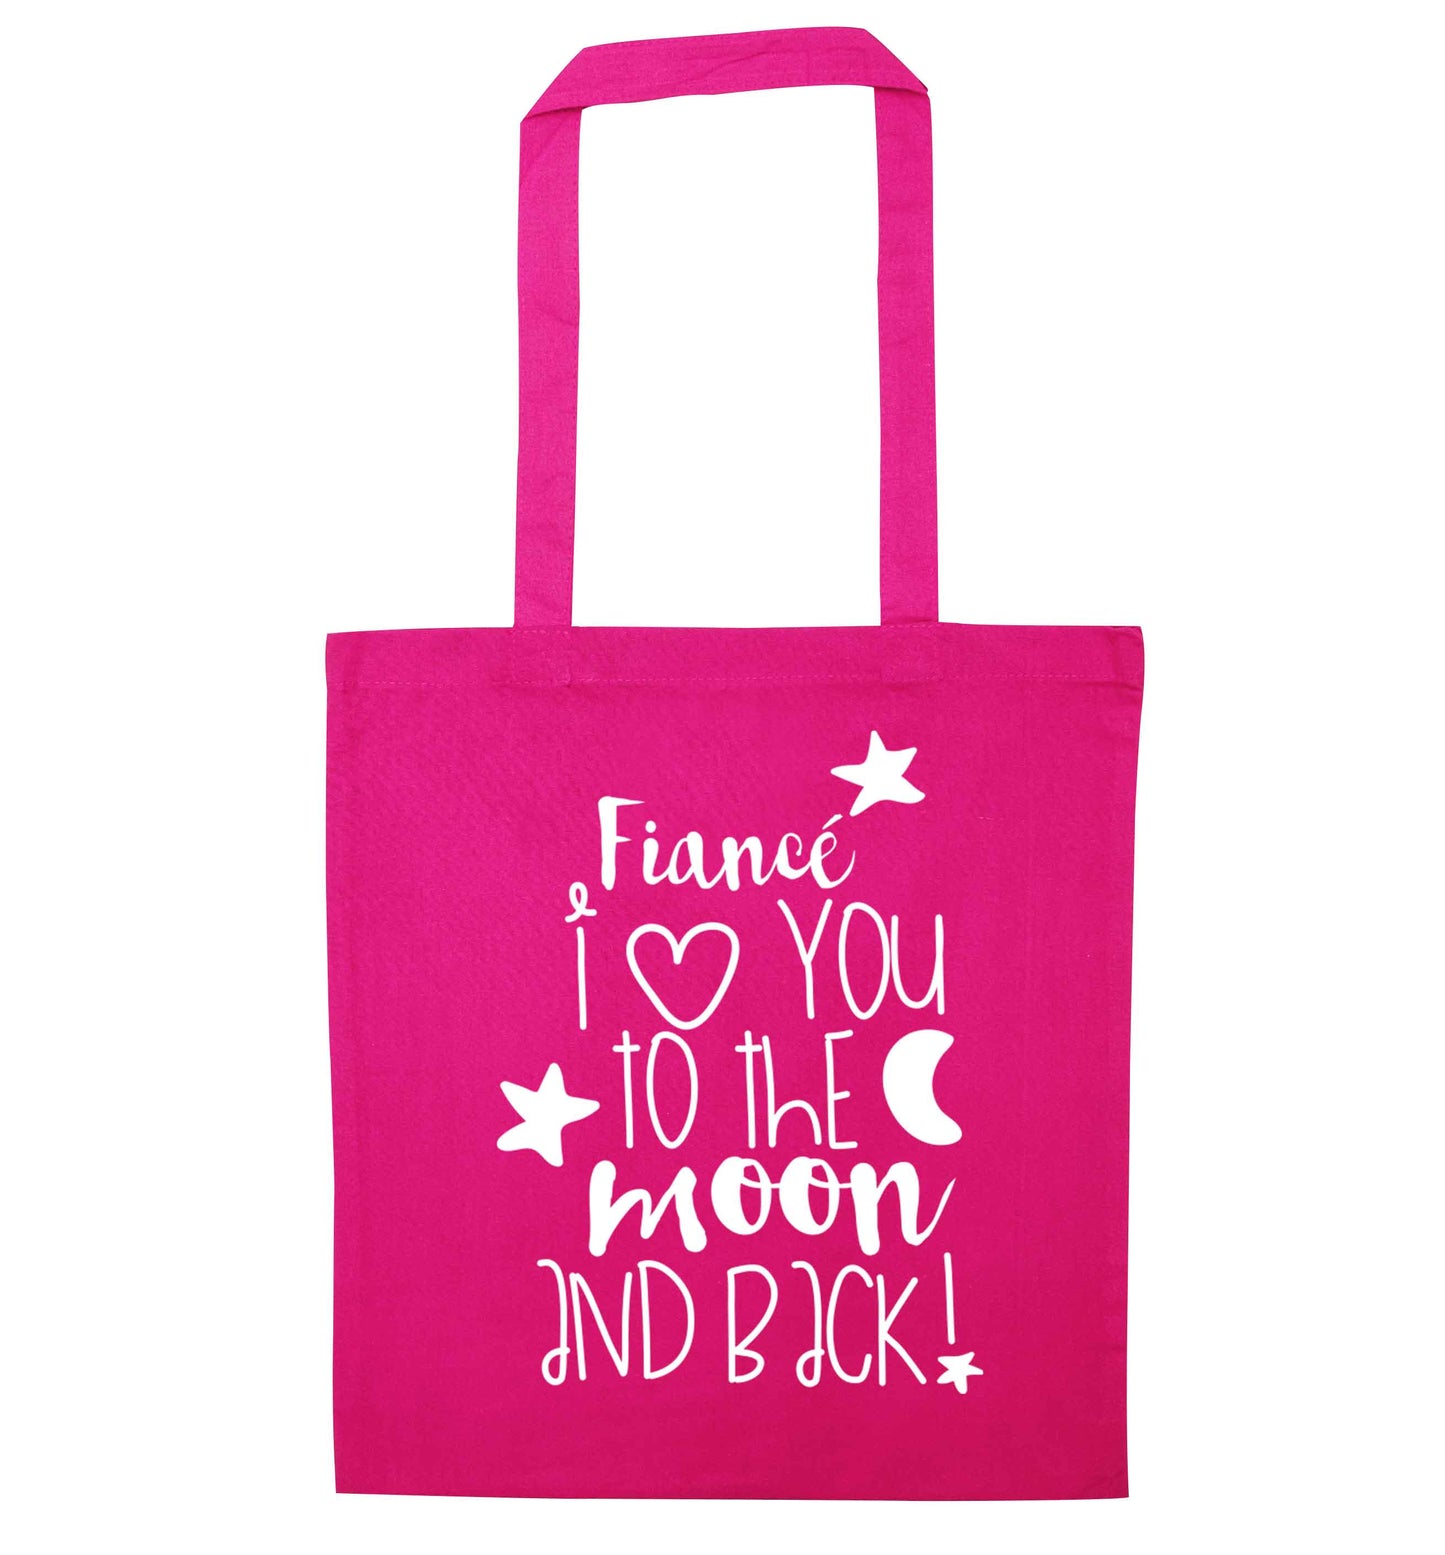 Fiancé I love you to the moon and back pink tote bag